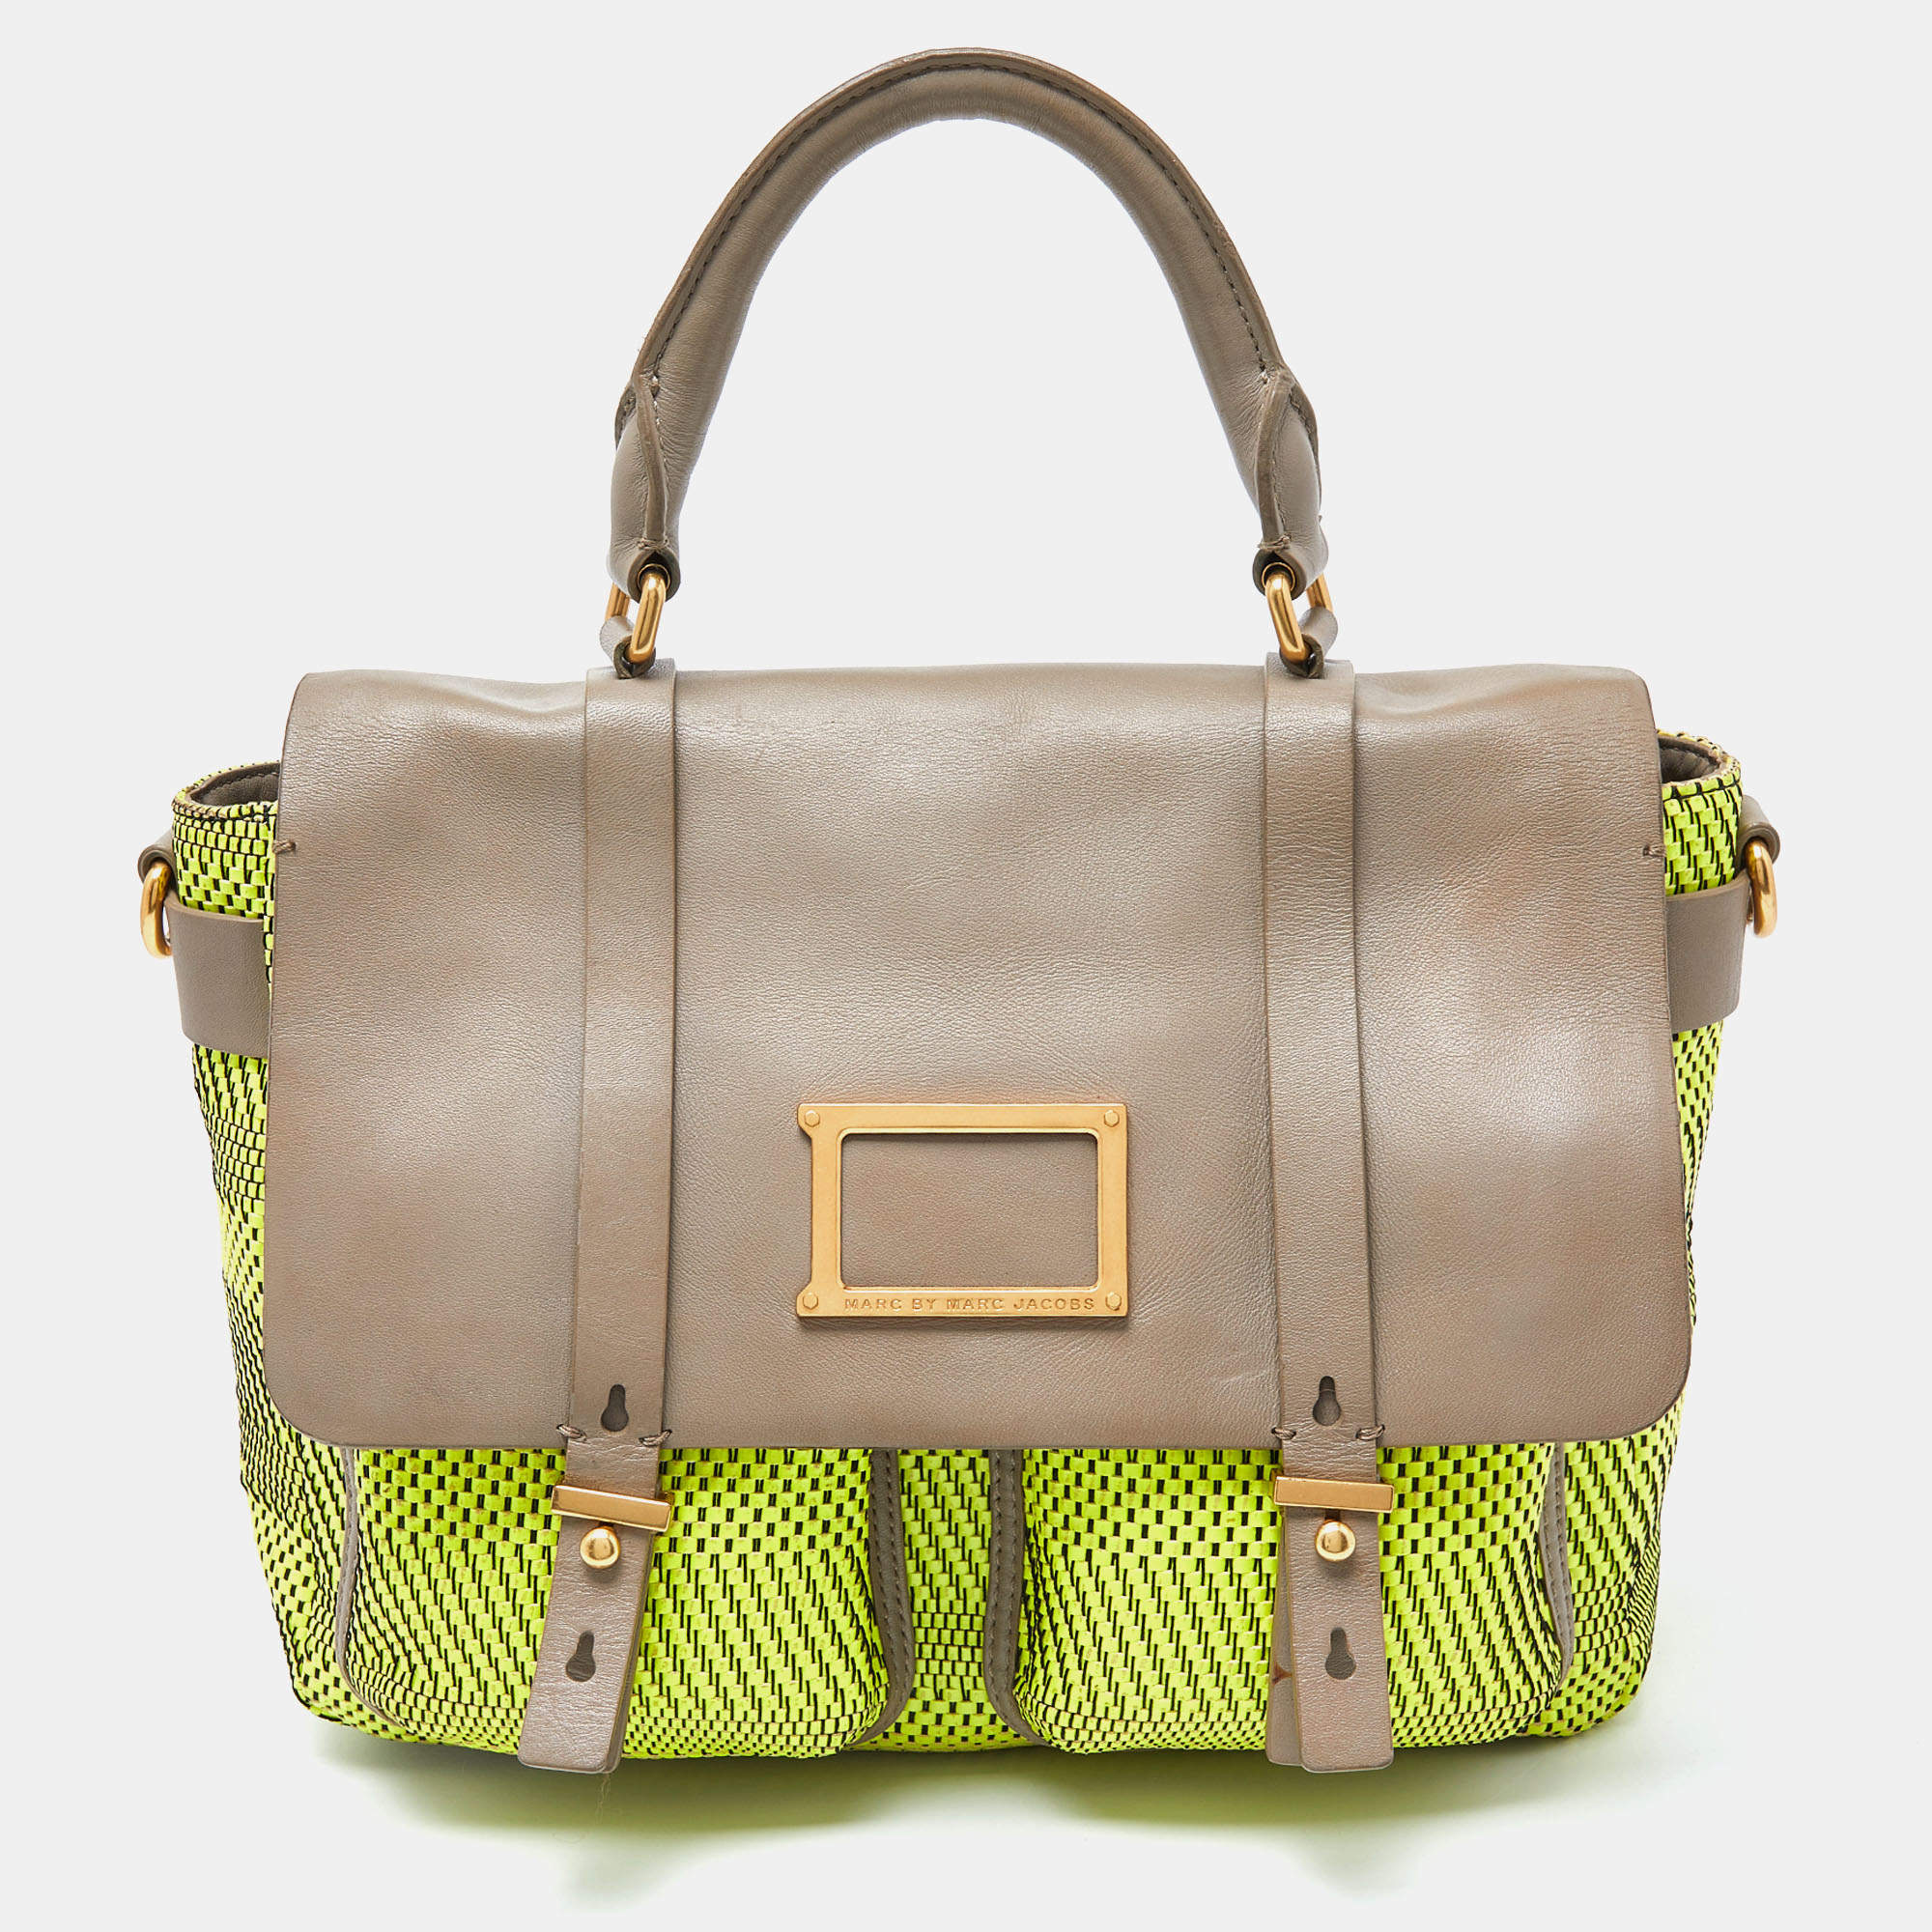 Marc by Marc Jacobs Neon Green/Grey Woven Patent and Leather Werdie Top Handle Bag